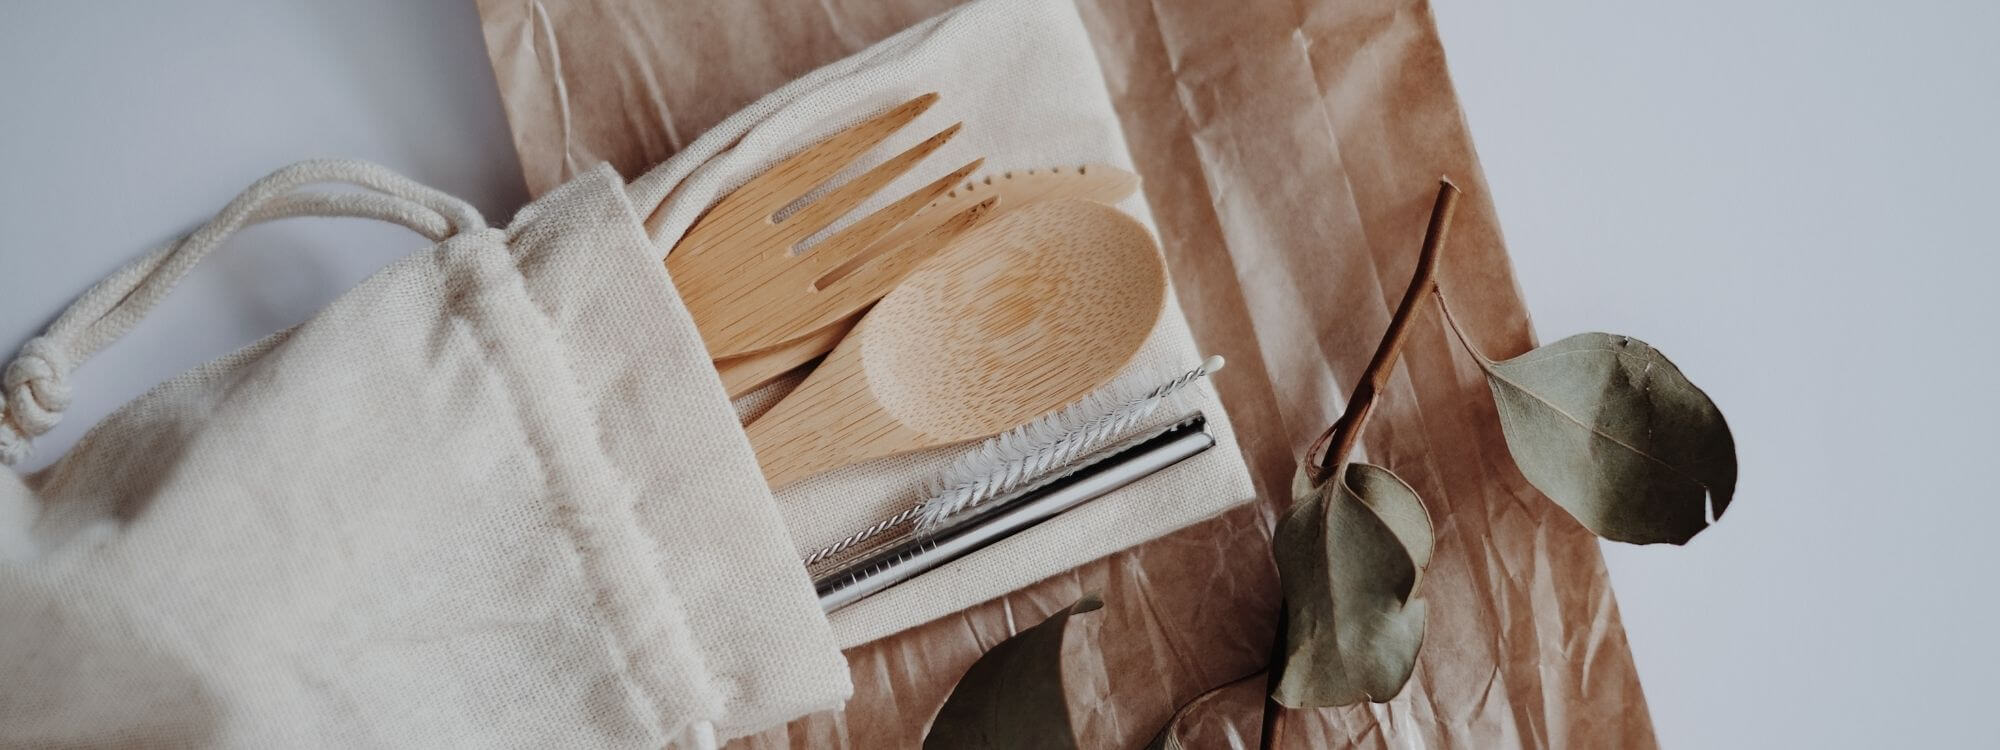 reusable bamboo eating utensils and stainless steel straw